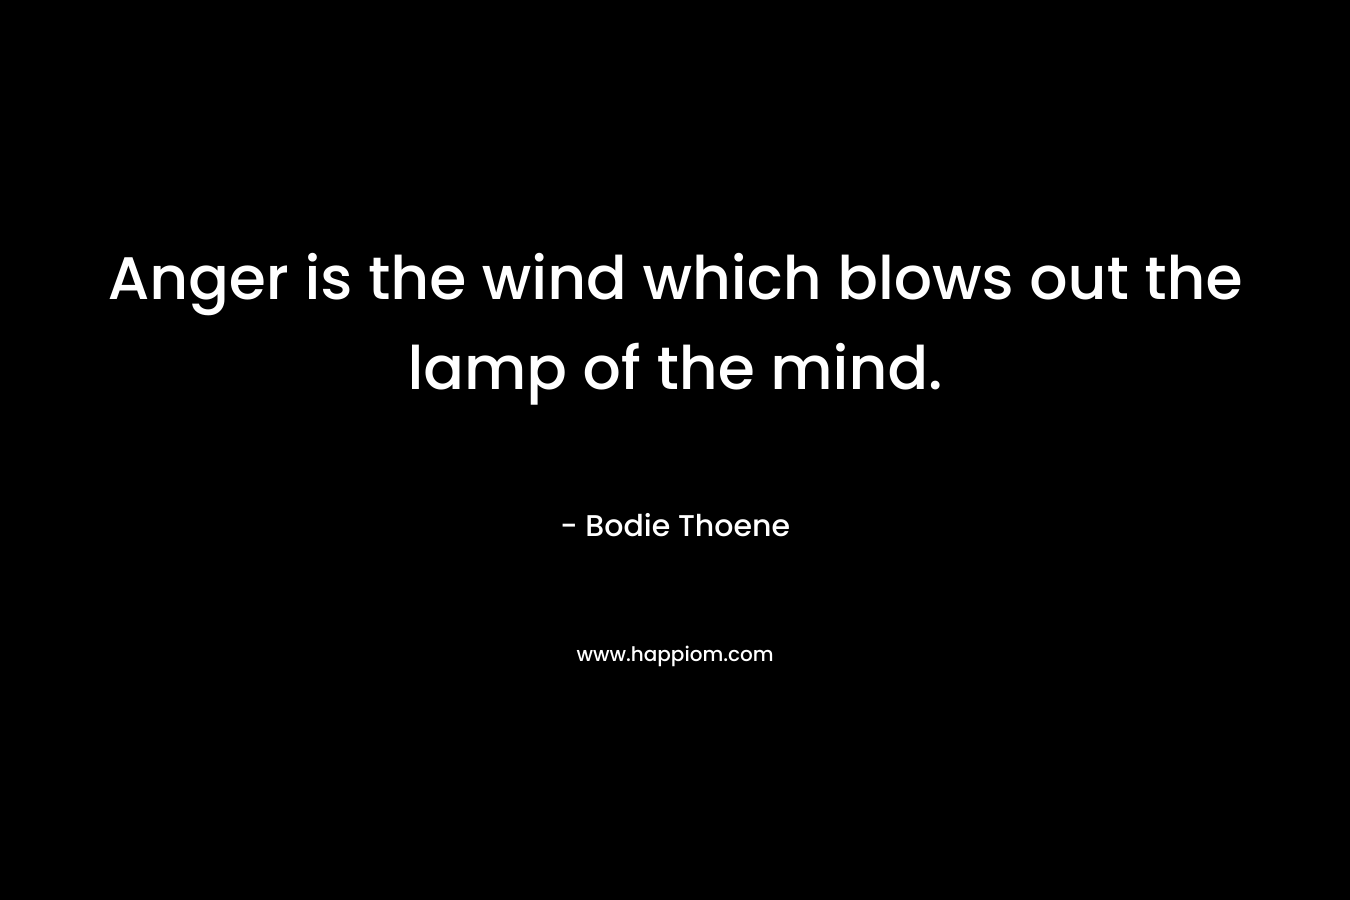 Anger is the wind which blows out the lamp of the mind. – Bodie Thoene